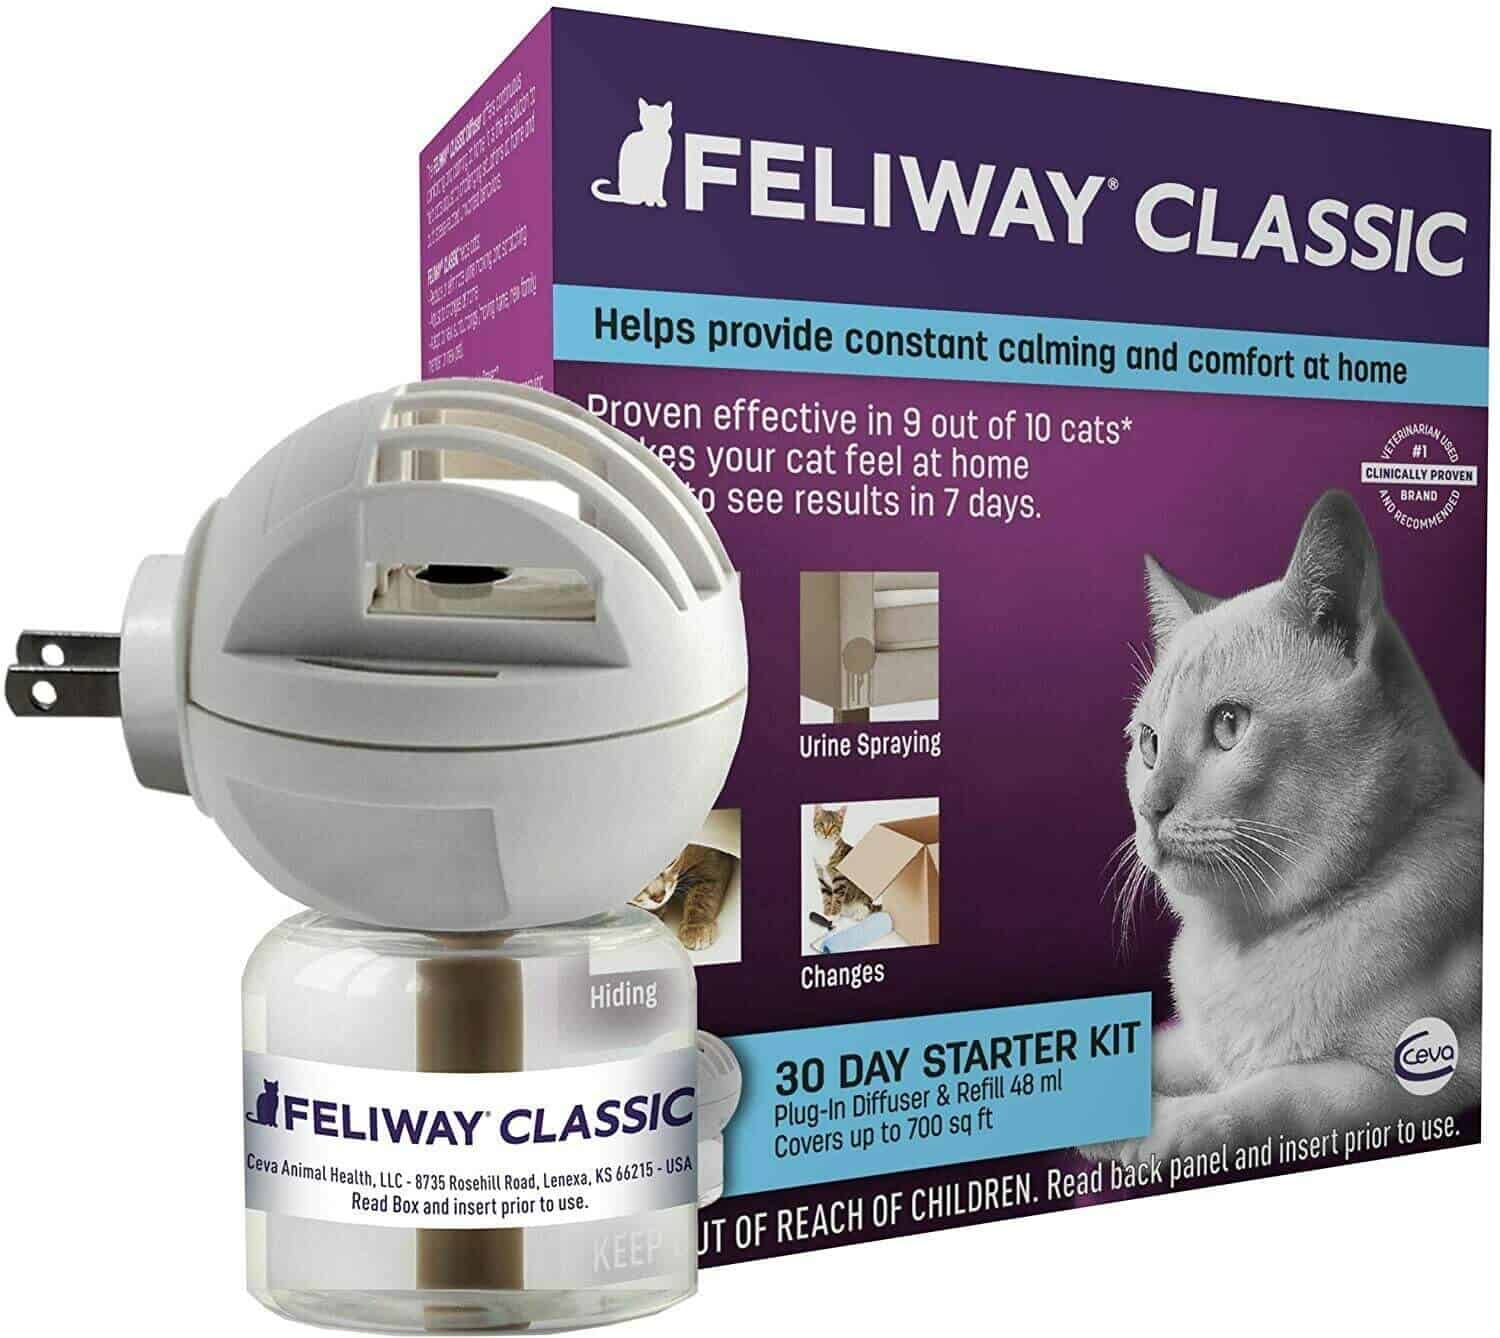 Feliway Diffuser Review: Is It Worth Your Money?